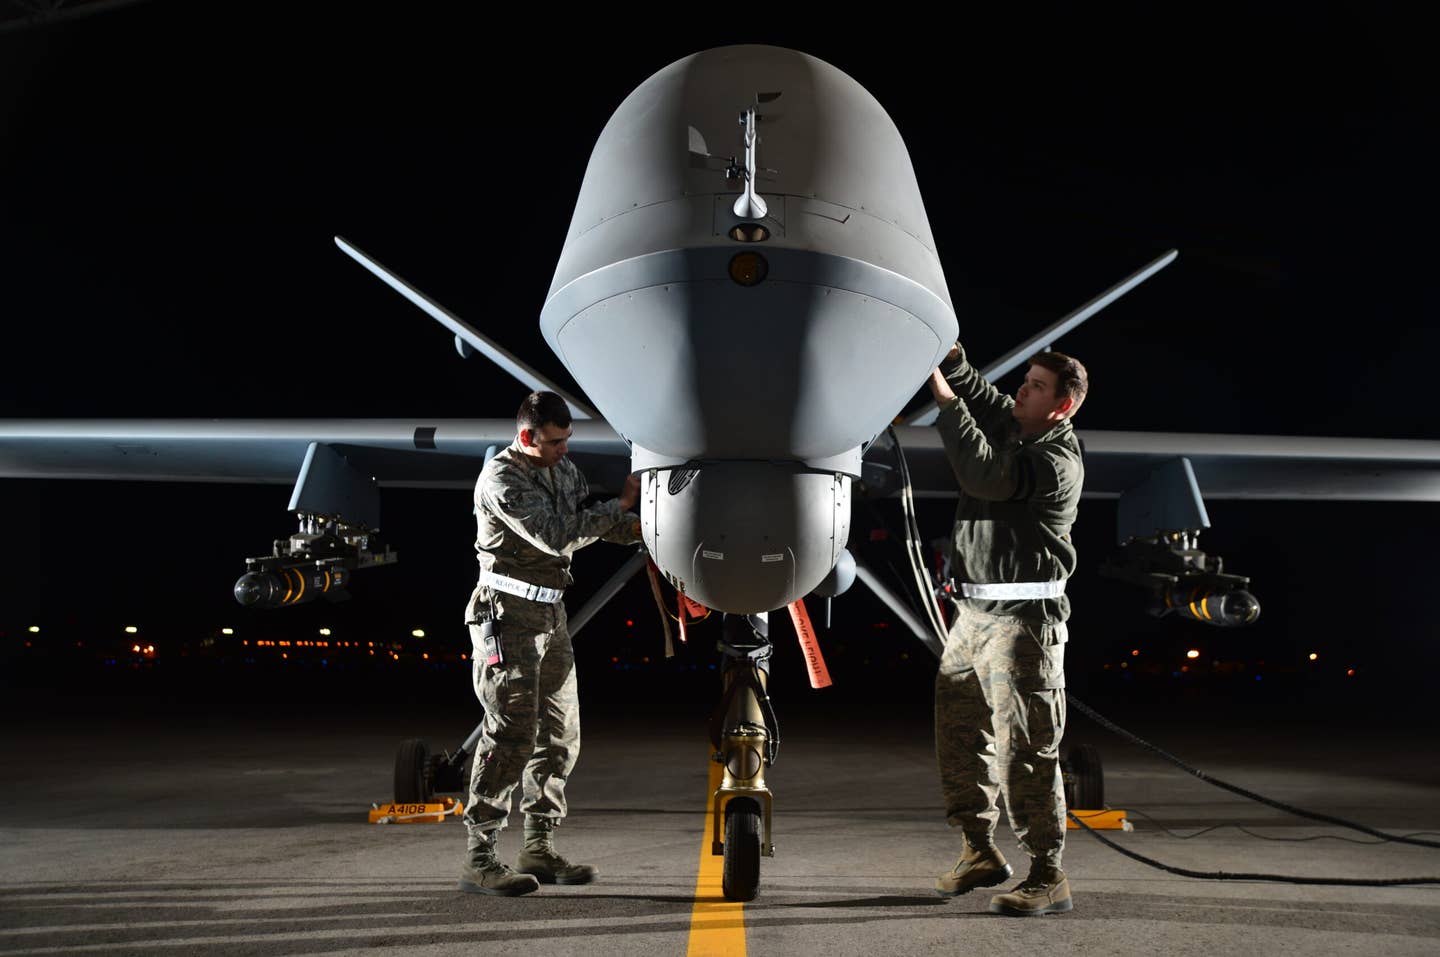 Airman 1st Class Steven (left) and Airman 1st Class Taylor prepare an MQ-9 Reaper for flight during exercise Combat Hammer, May 15, 2014, AGM-114 Hellfire munitions can be seen under the wings. <em>Credit: U.S. Air Force photo/Staff Sgt. Nadine Barclay</em>